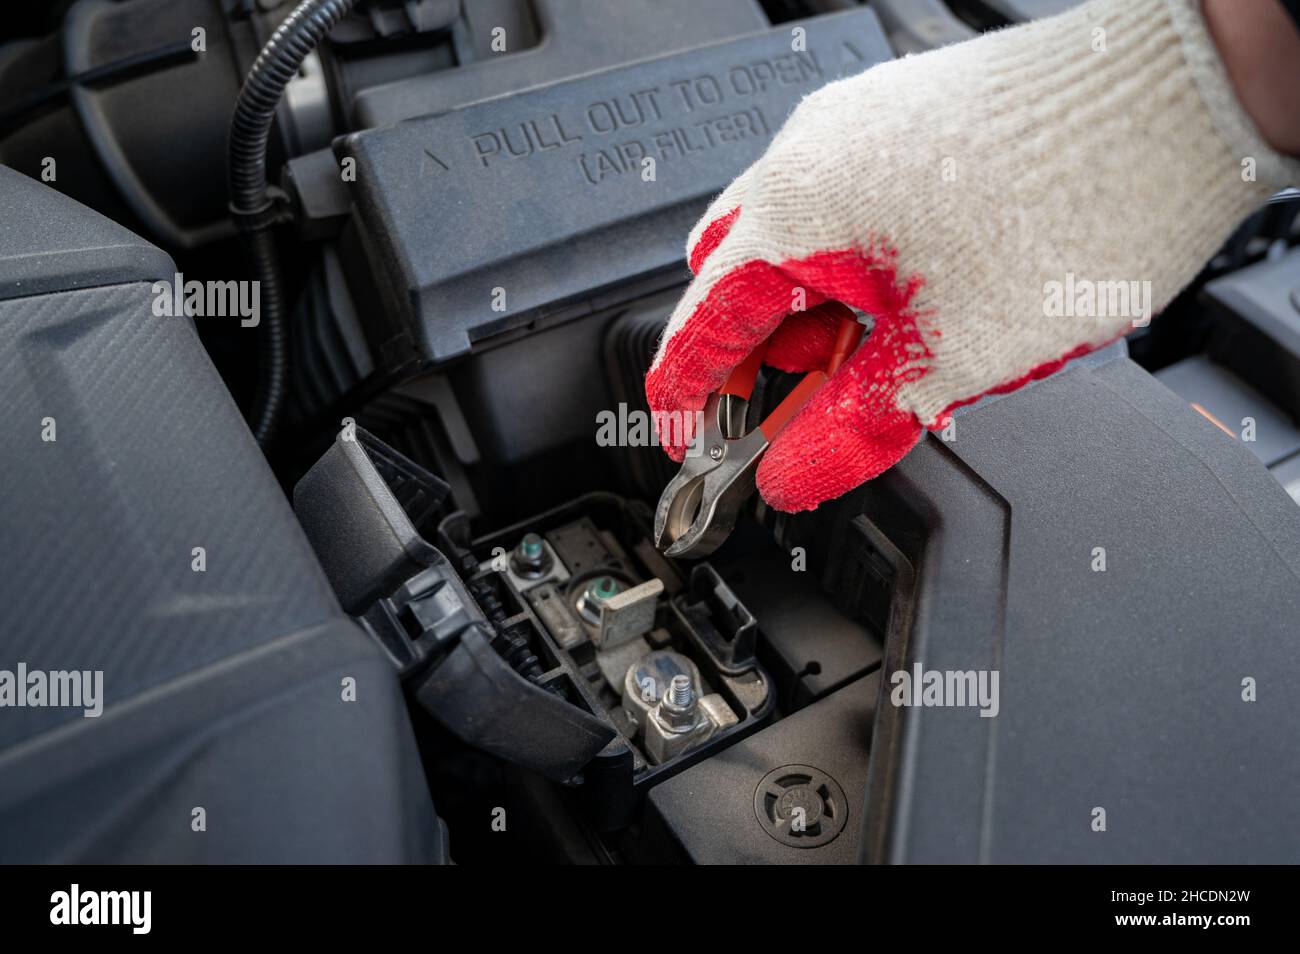 Driver's hand checking the condition of the car's battery. Stock Photo